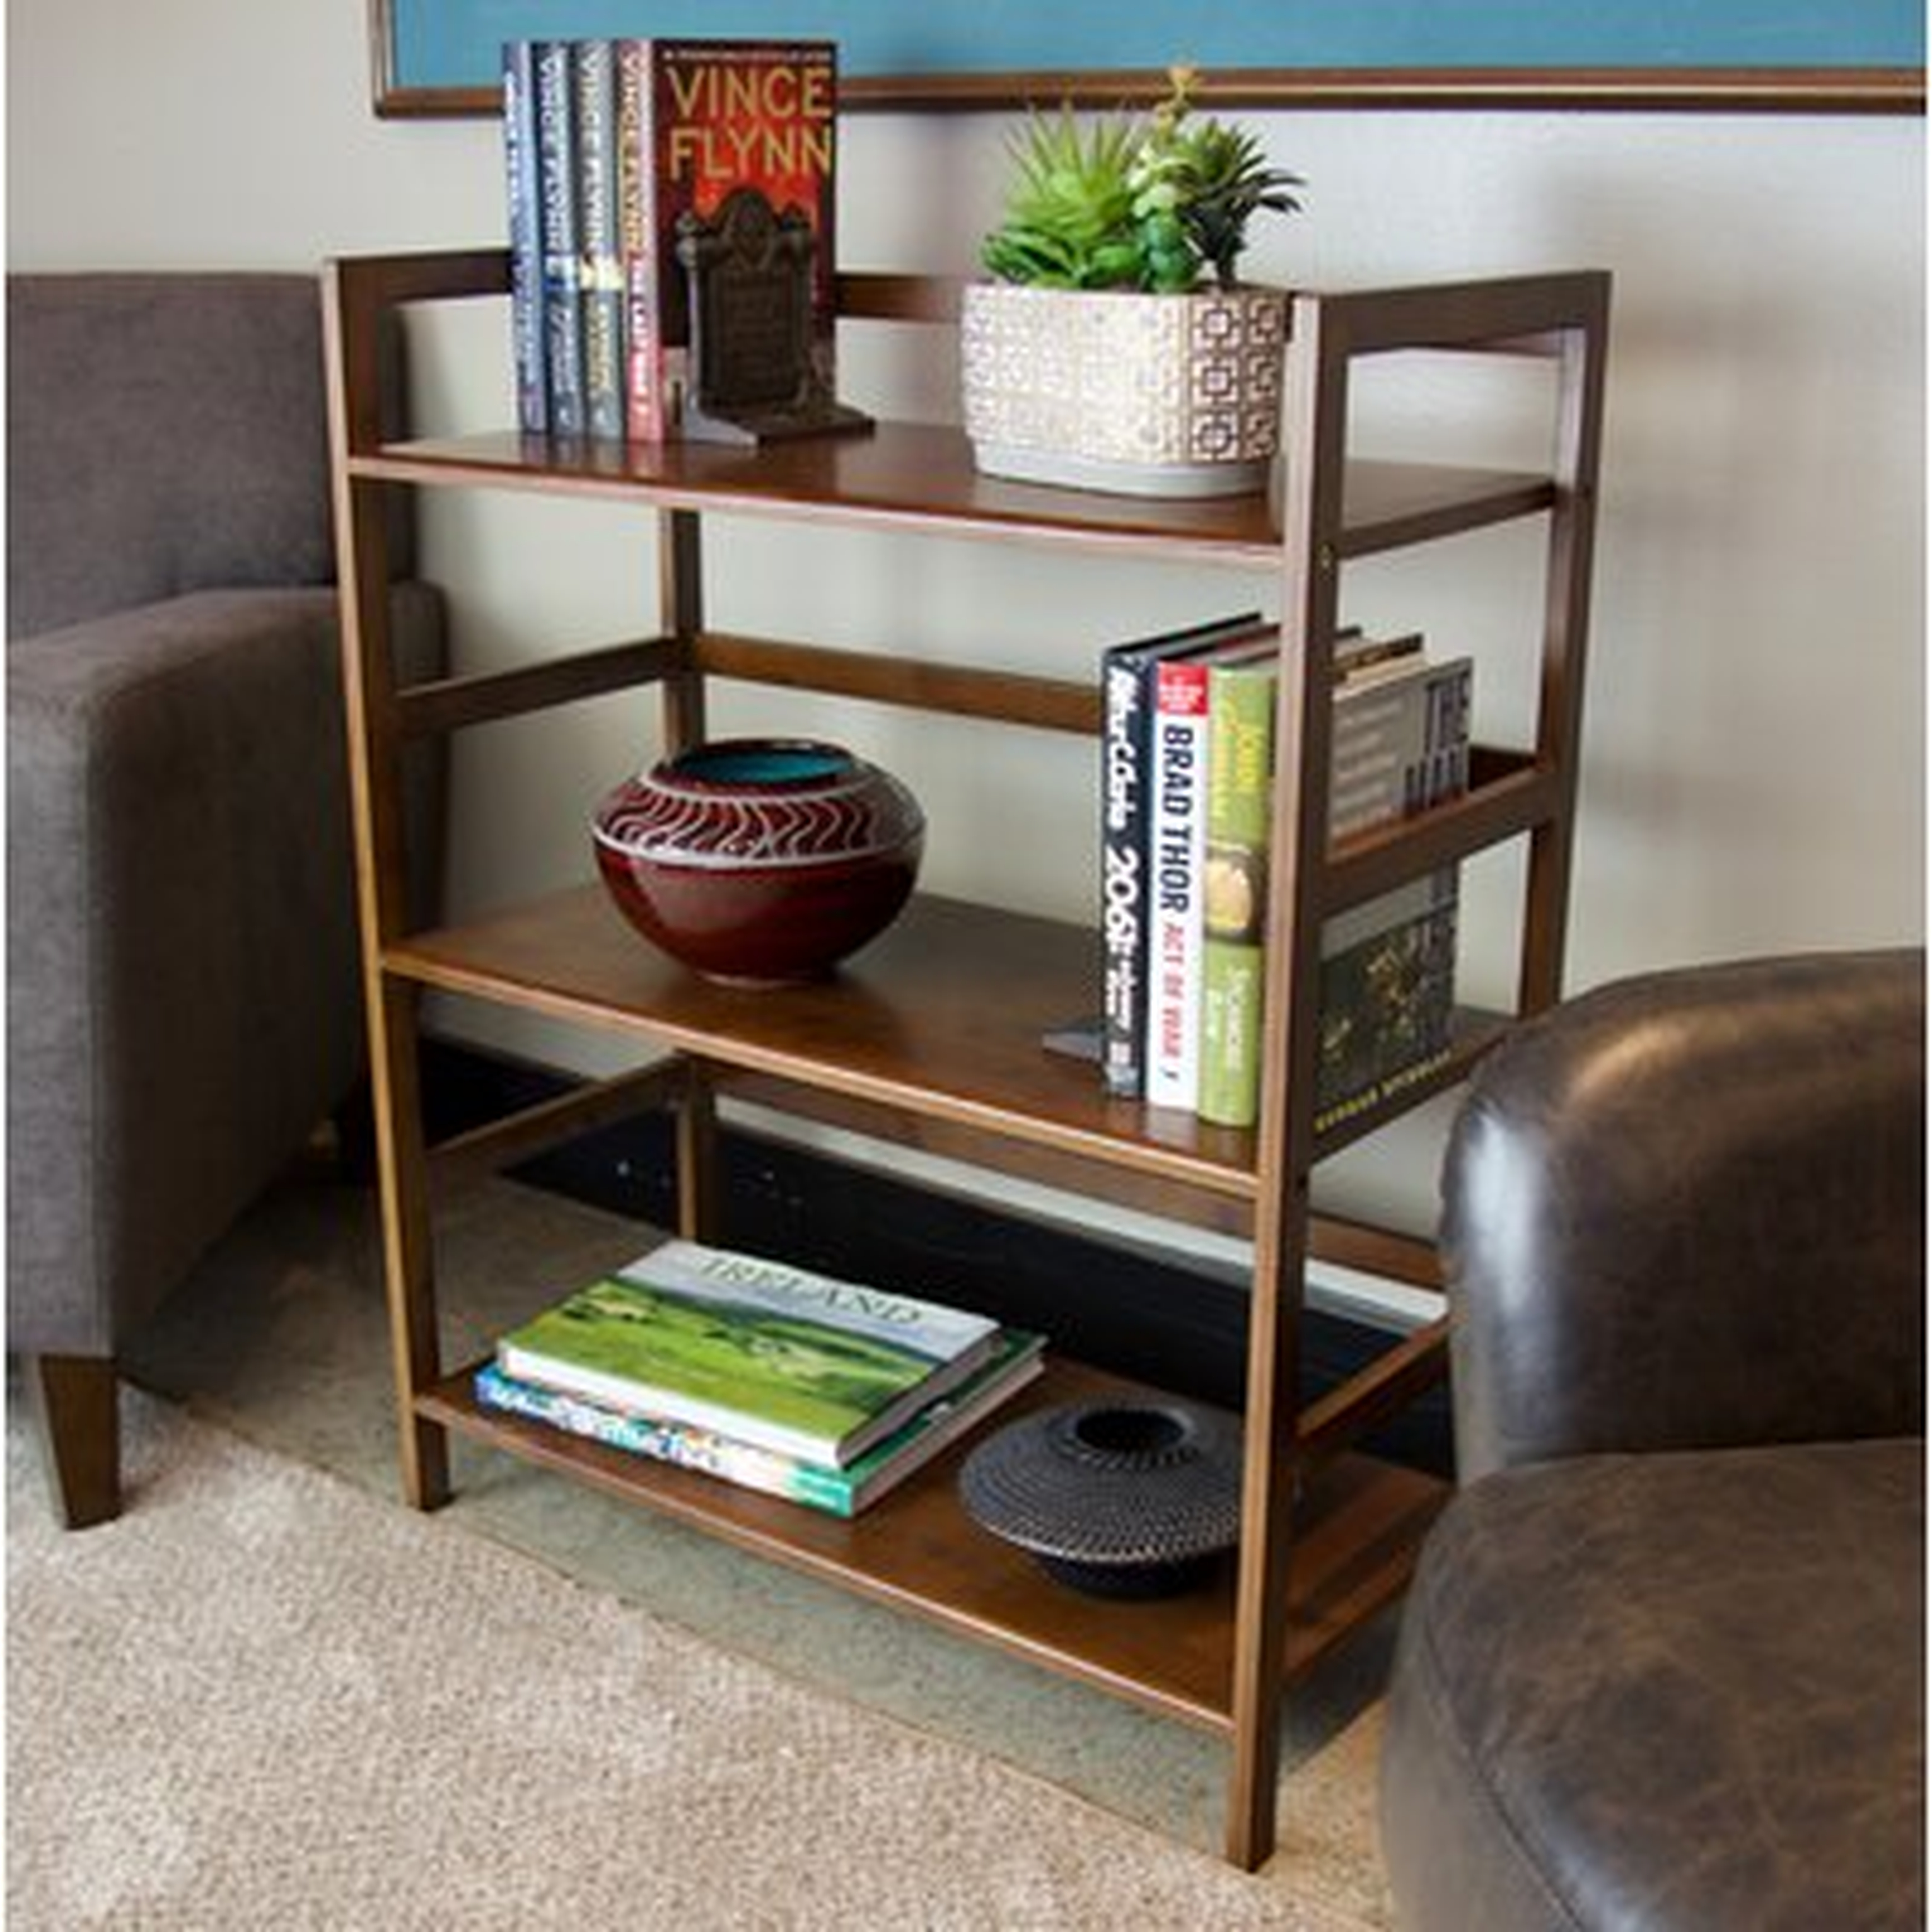 Coma 33.85" H x 27.5" W Solid Wood Etagere Bookcase - Wayfair